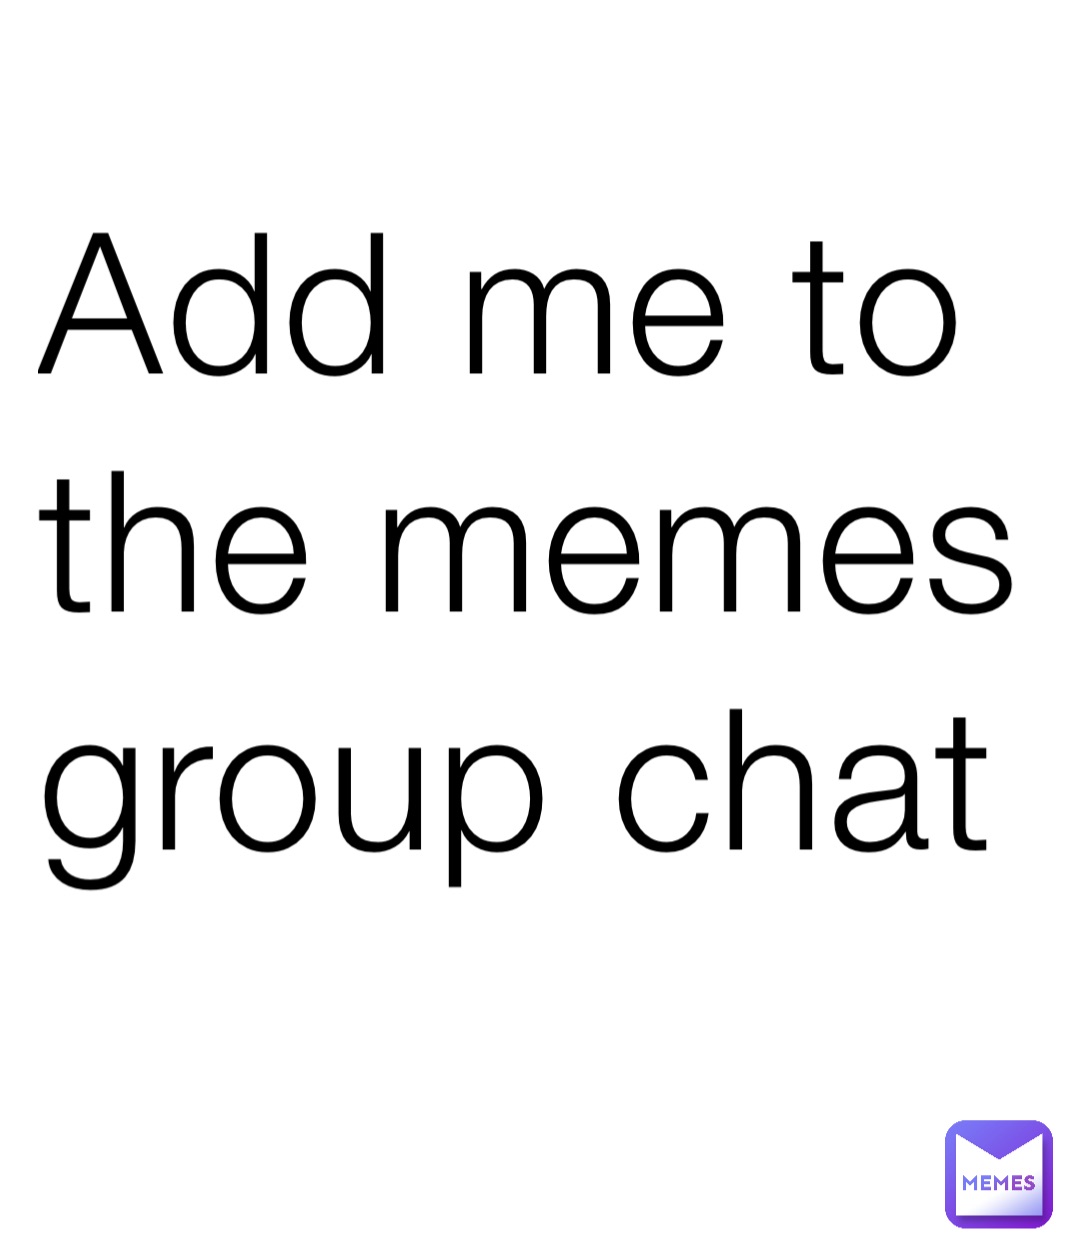 Add me to the memes group chat